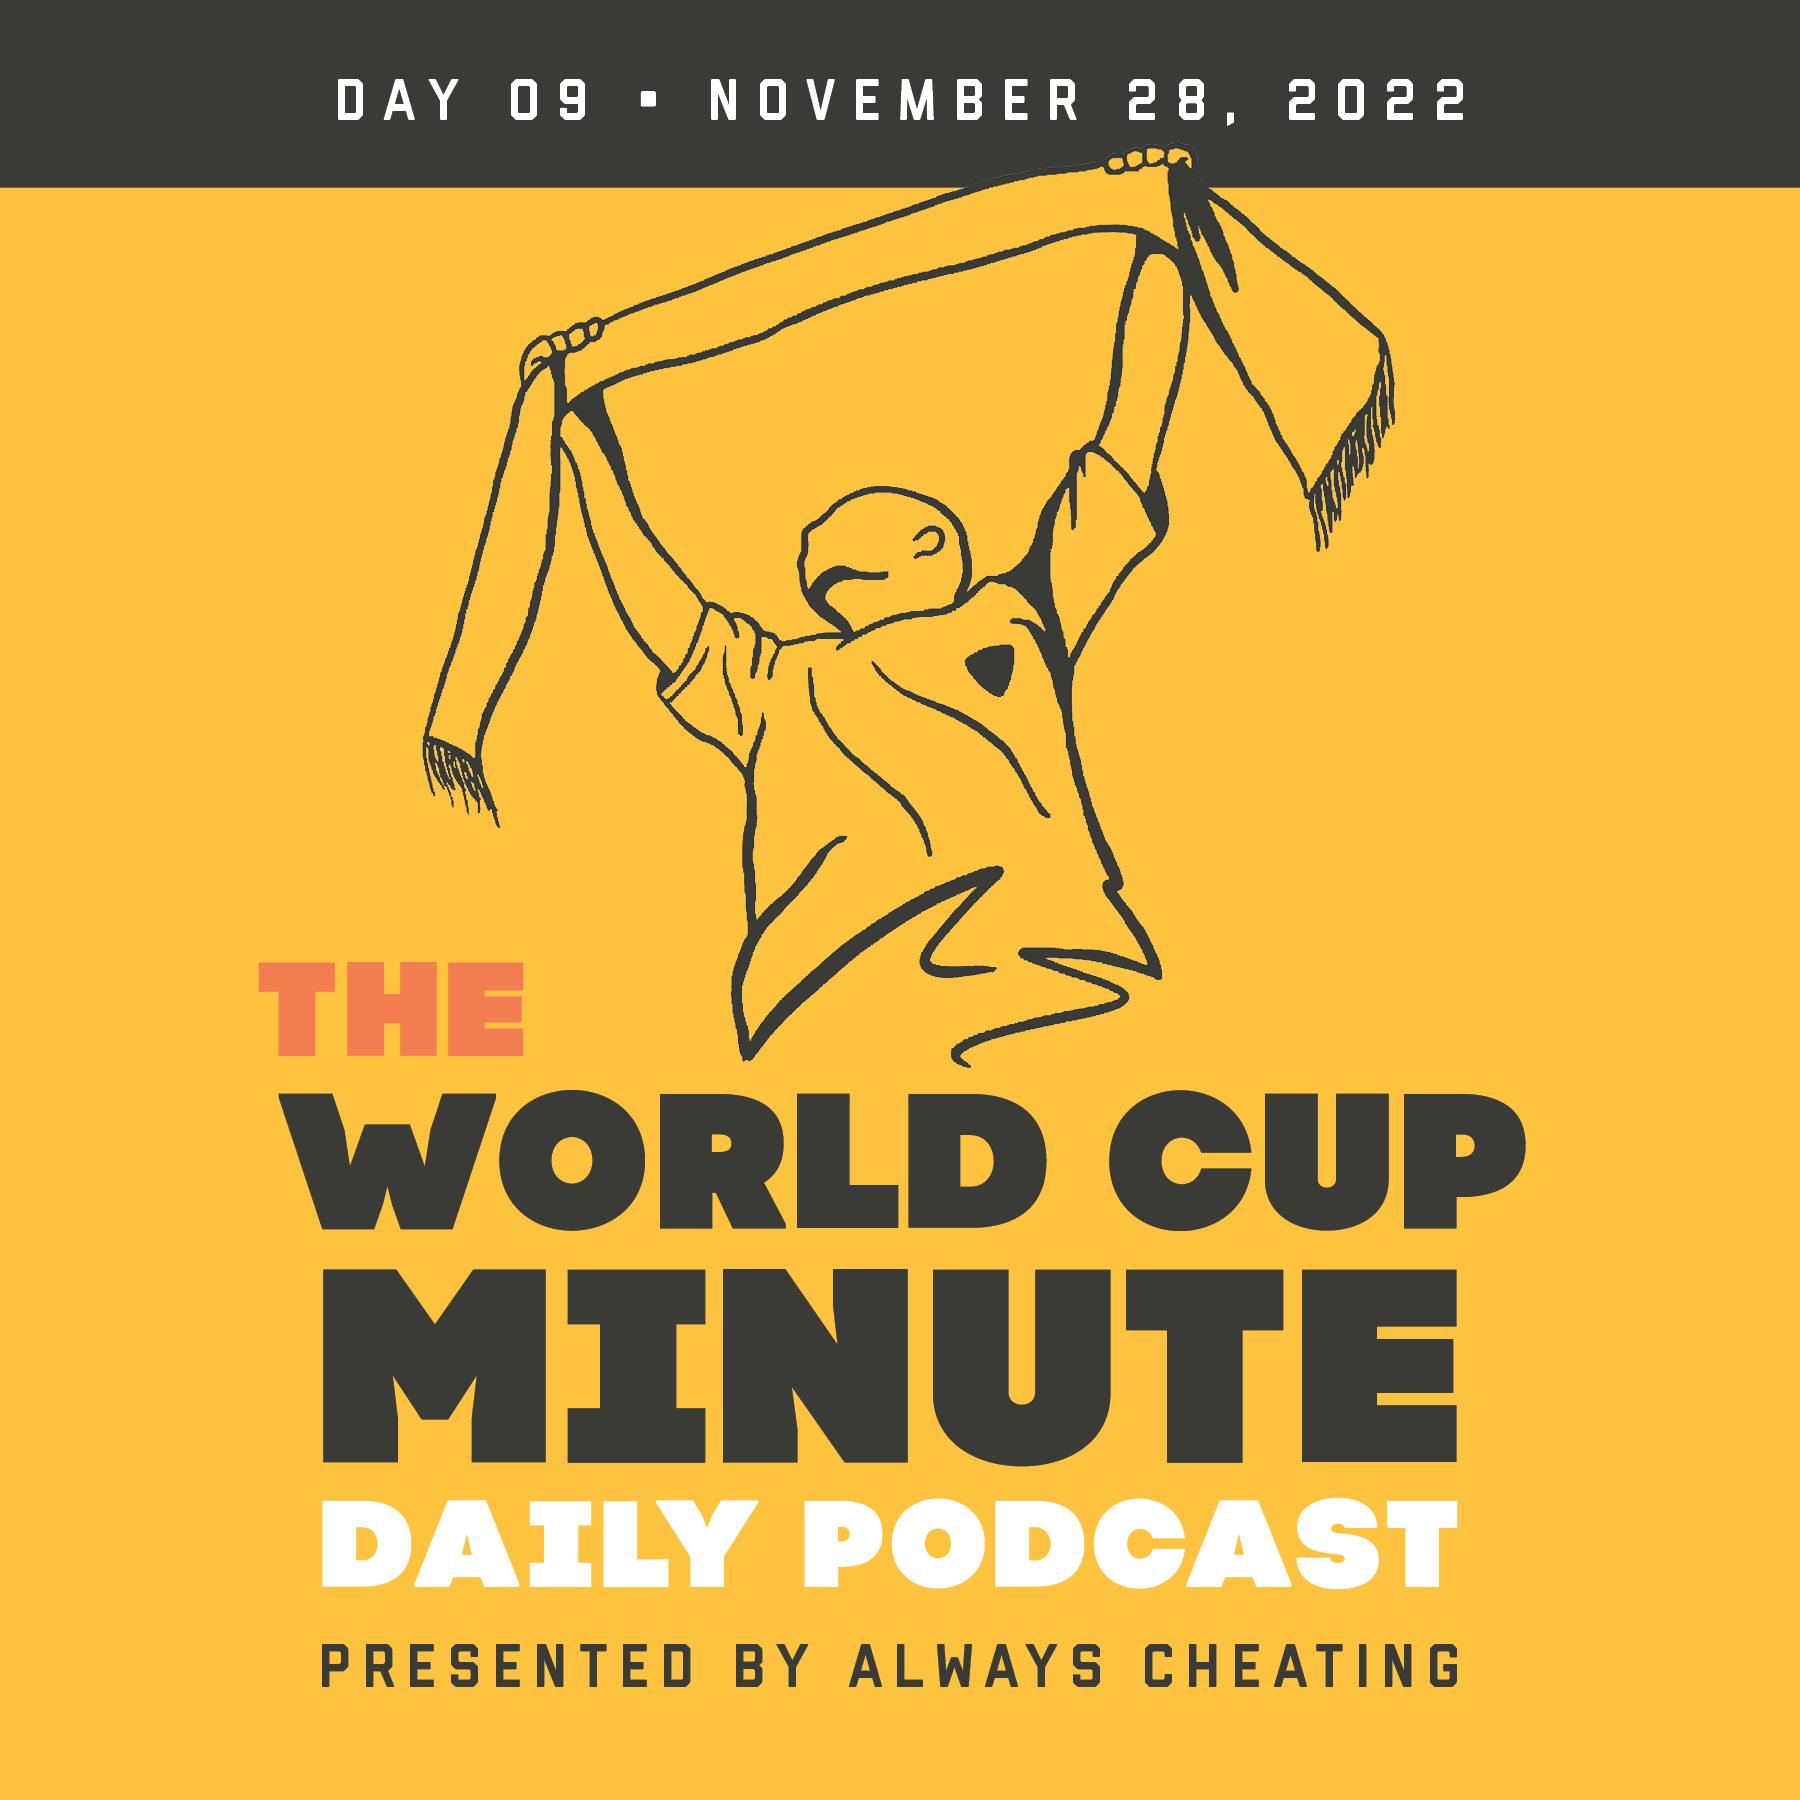 World Cup Day 9 - November 28, 2022